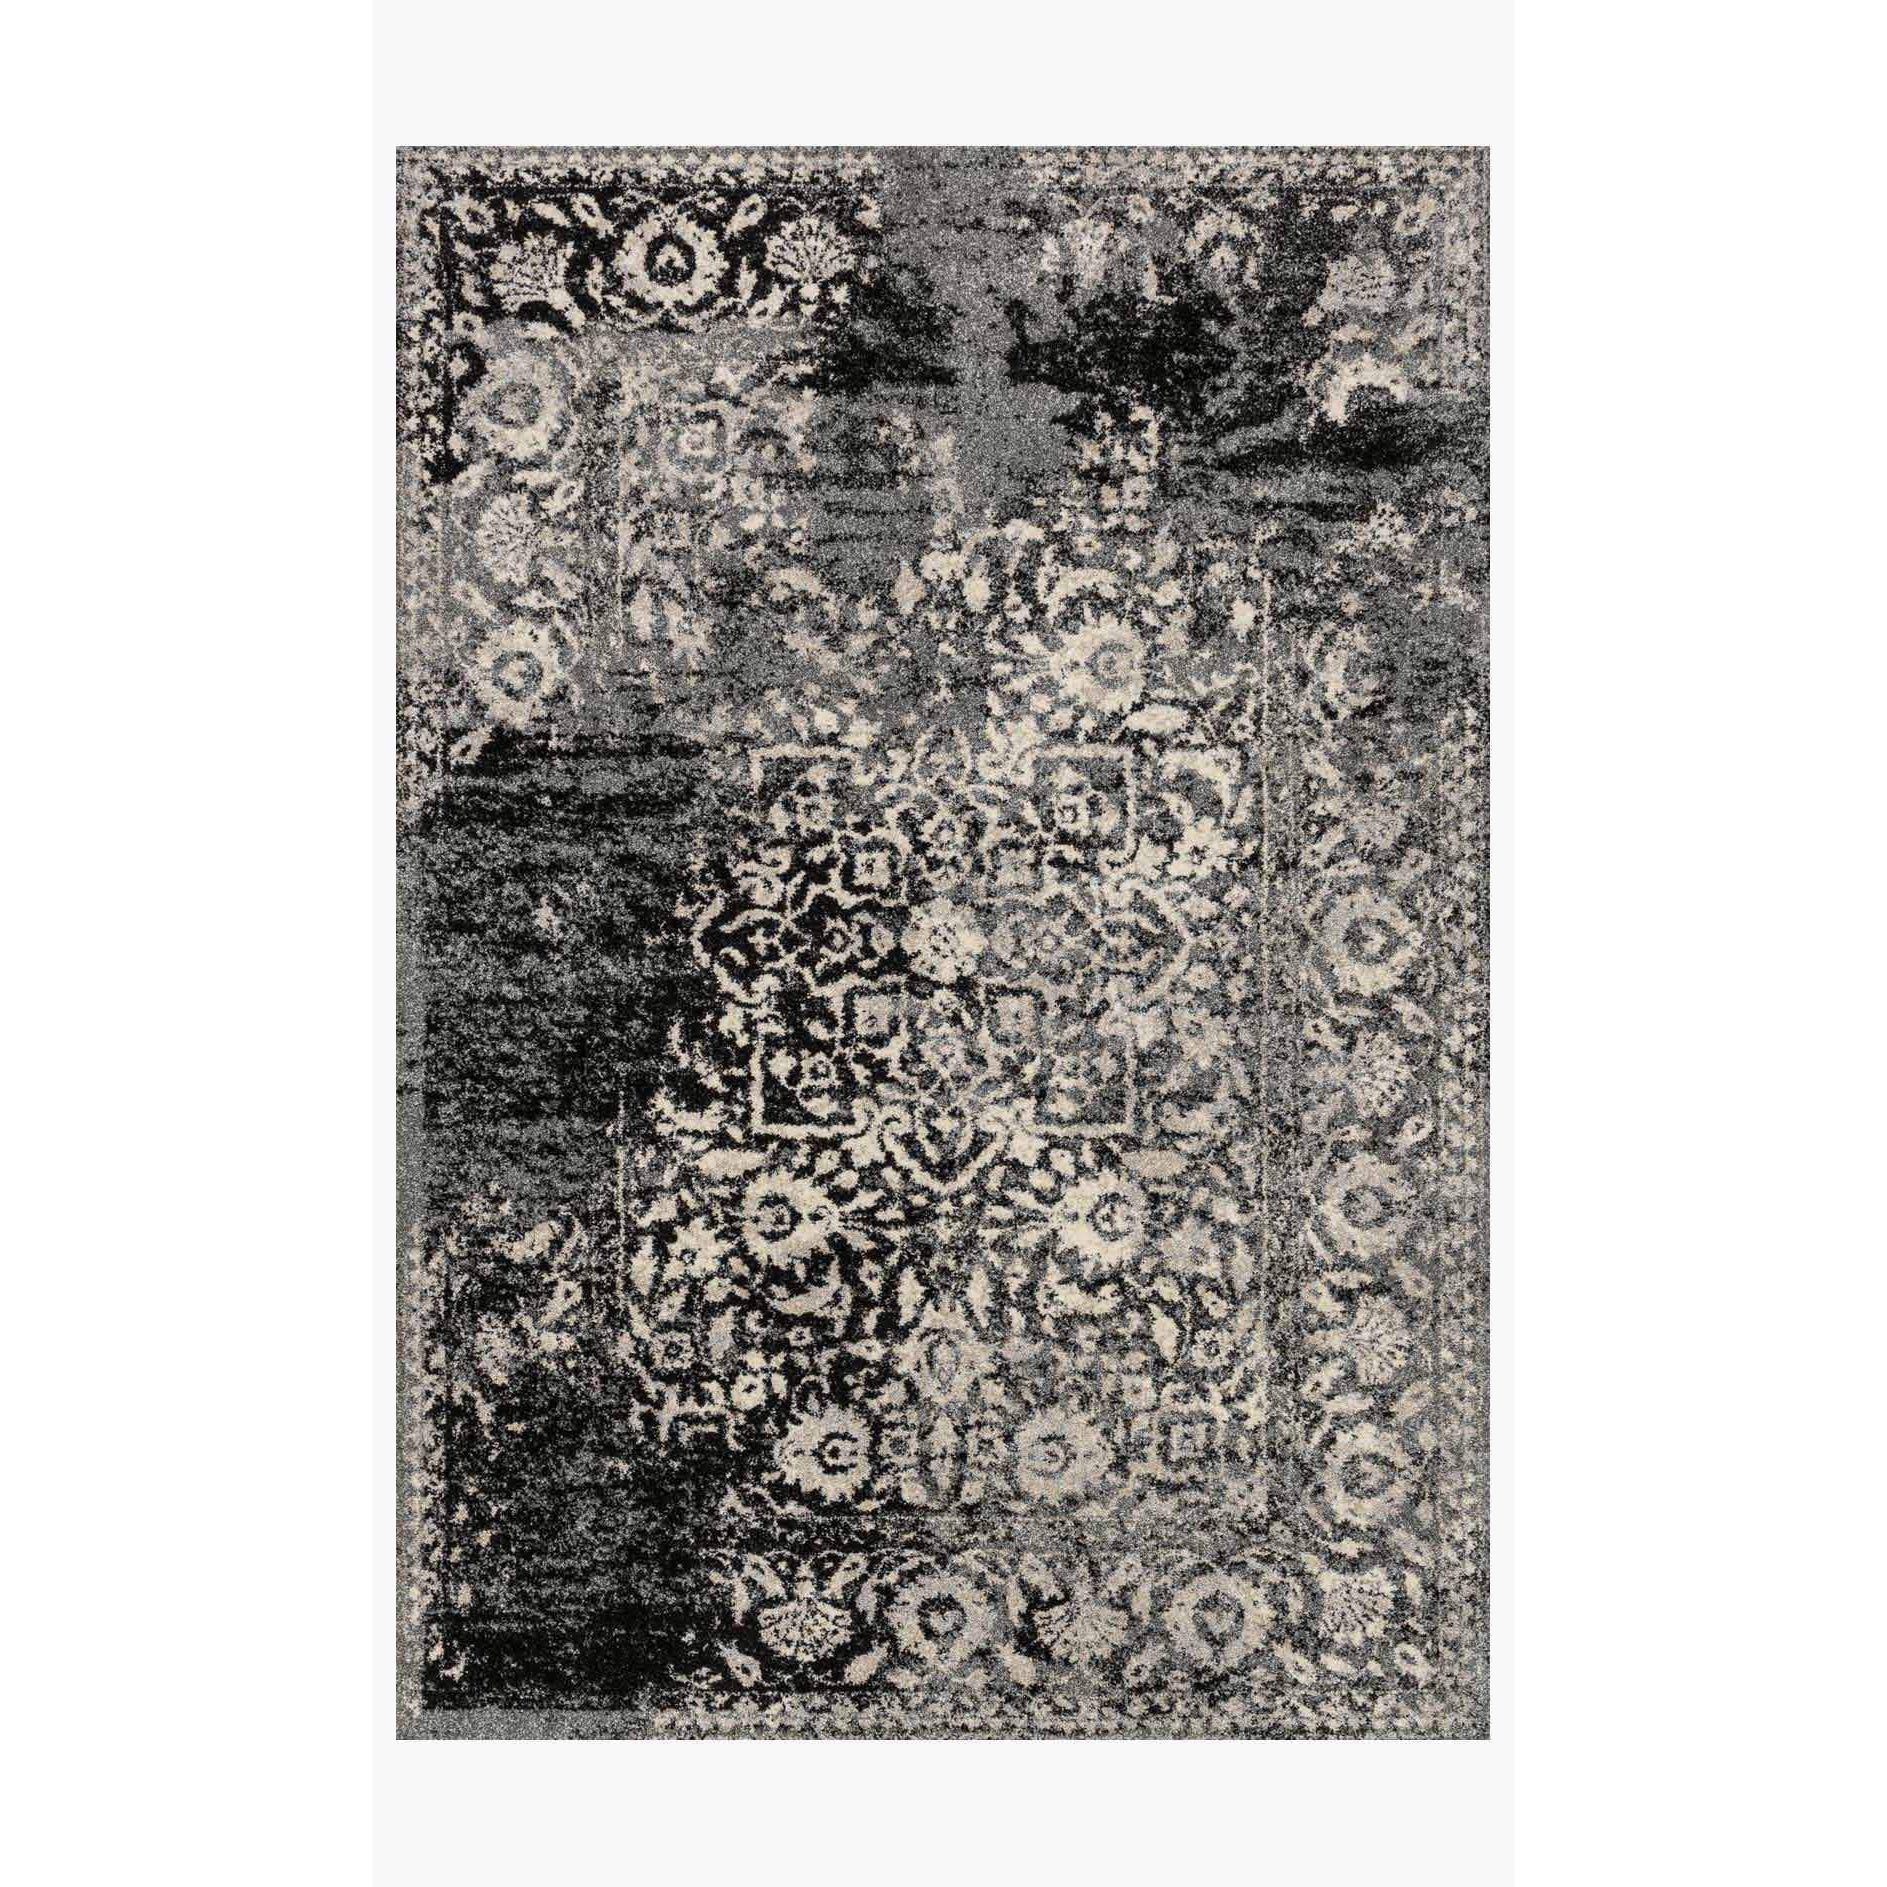 Emory Rug in Black / Ivory by Loloi